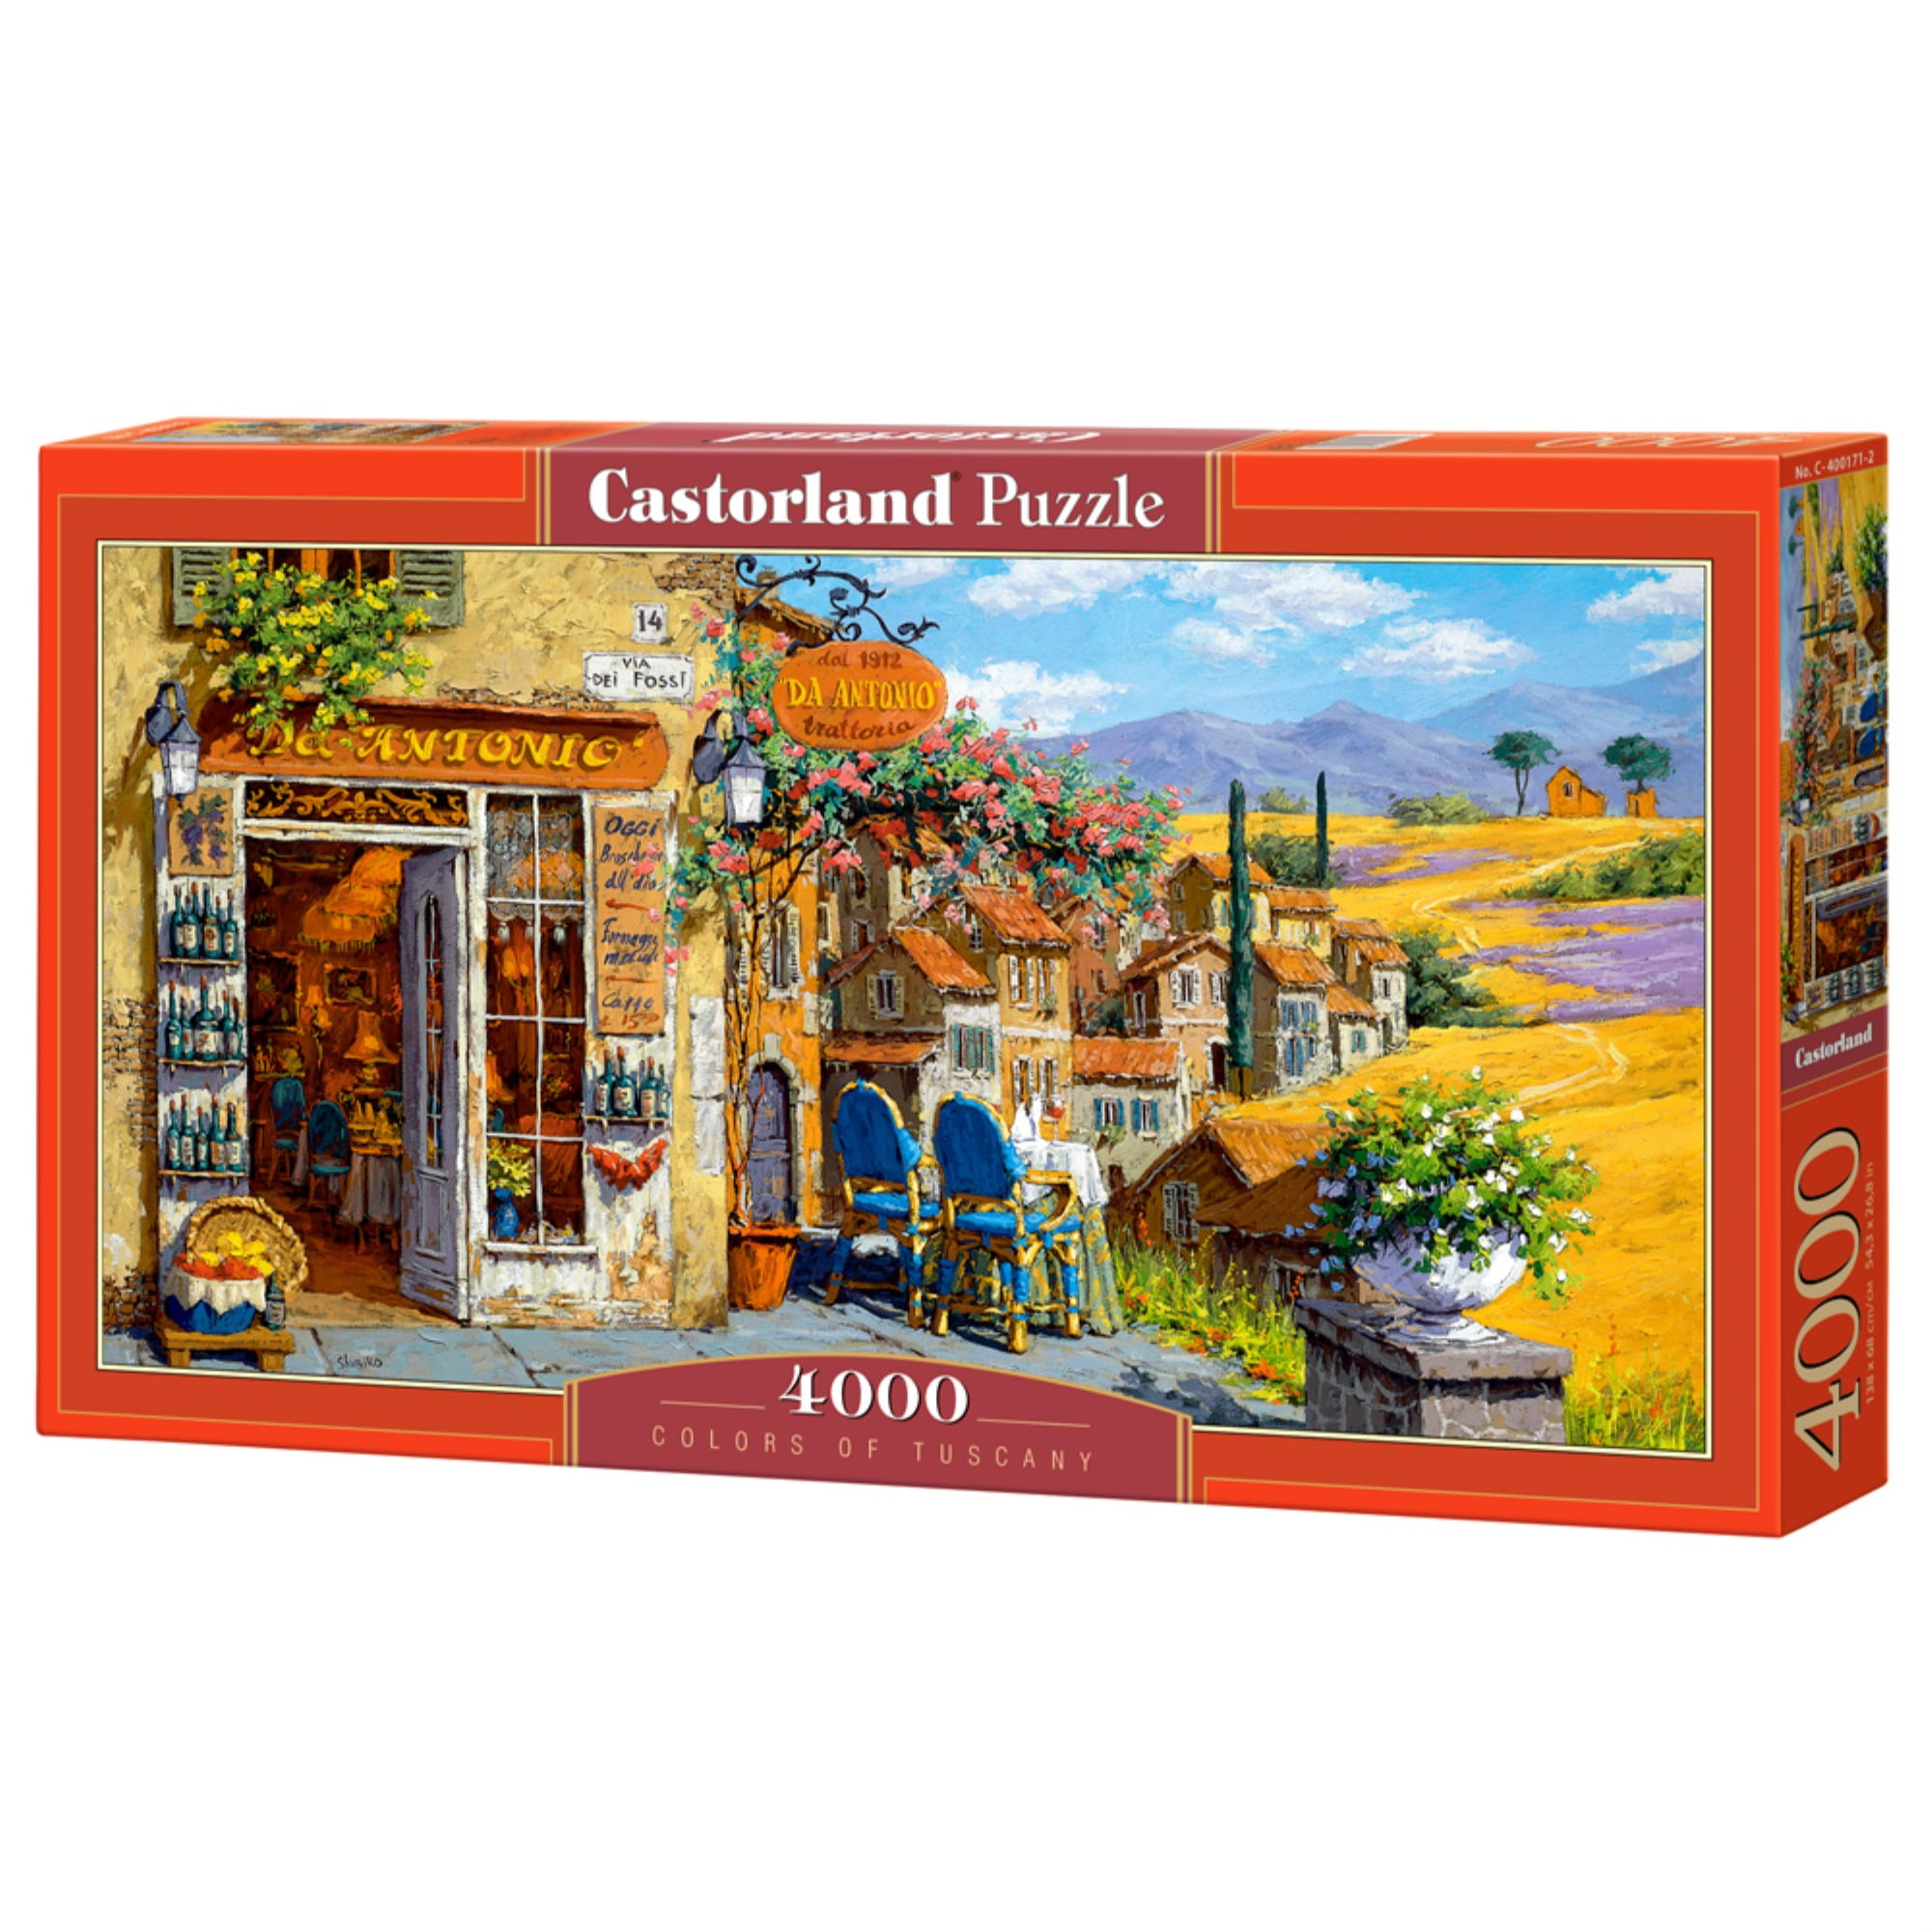 Forest Cottage, 3000 Pc Jigsaw Puzzle by Castorland – Prestige Puzzles